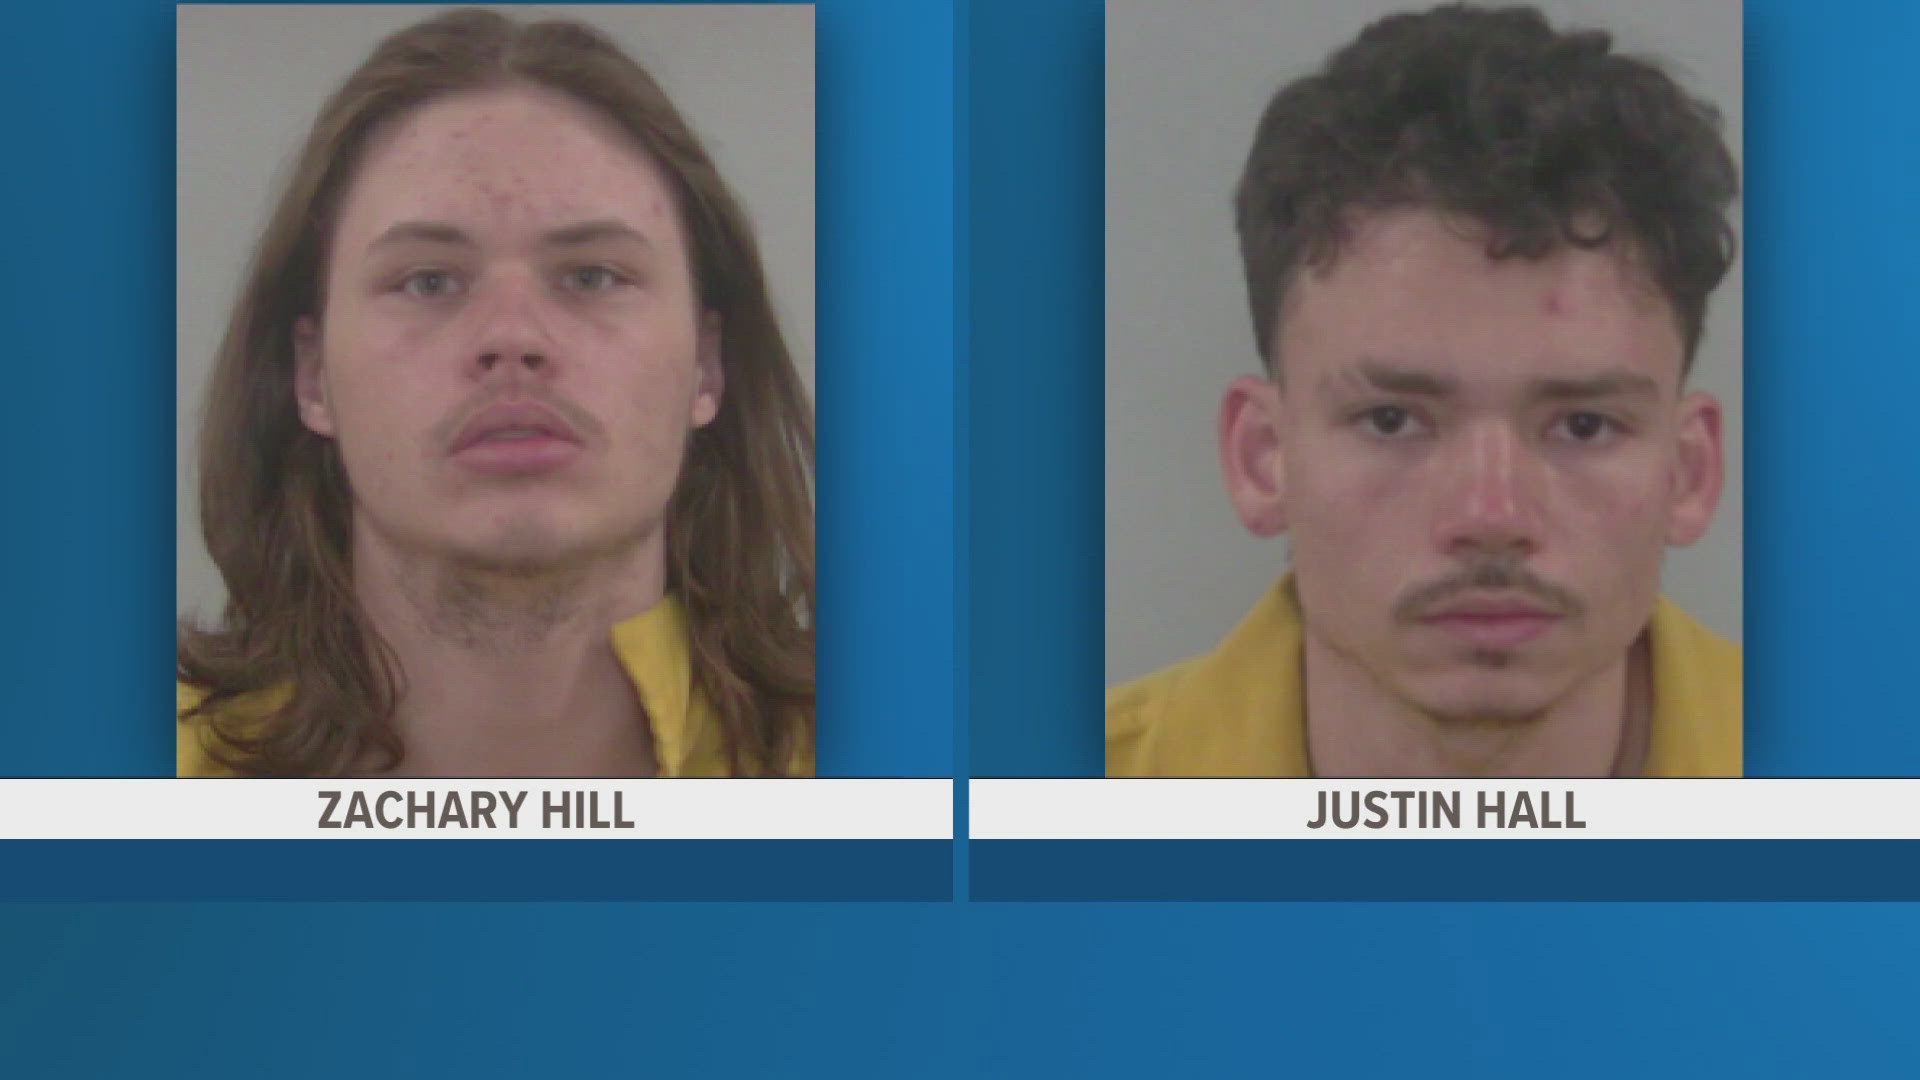 Two men were arrested after officers busted their large drug operation Friday in Columbia County, the sheriff's office said.